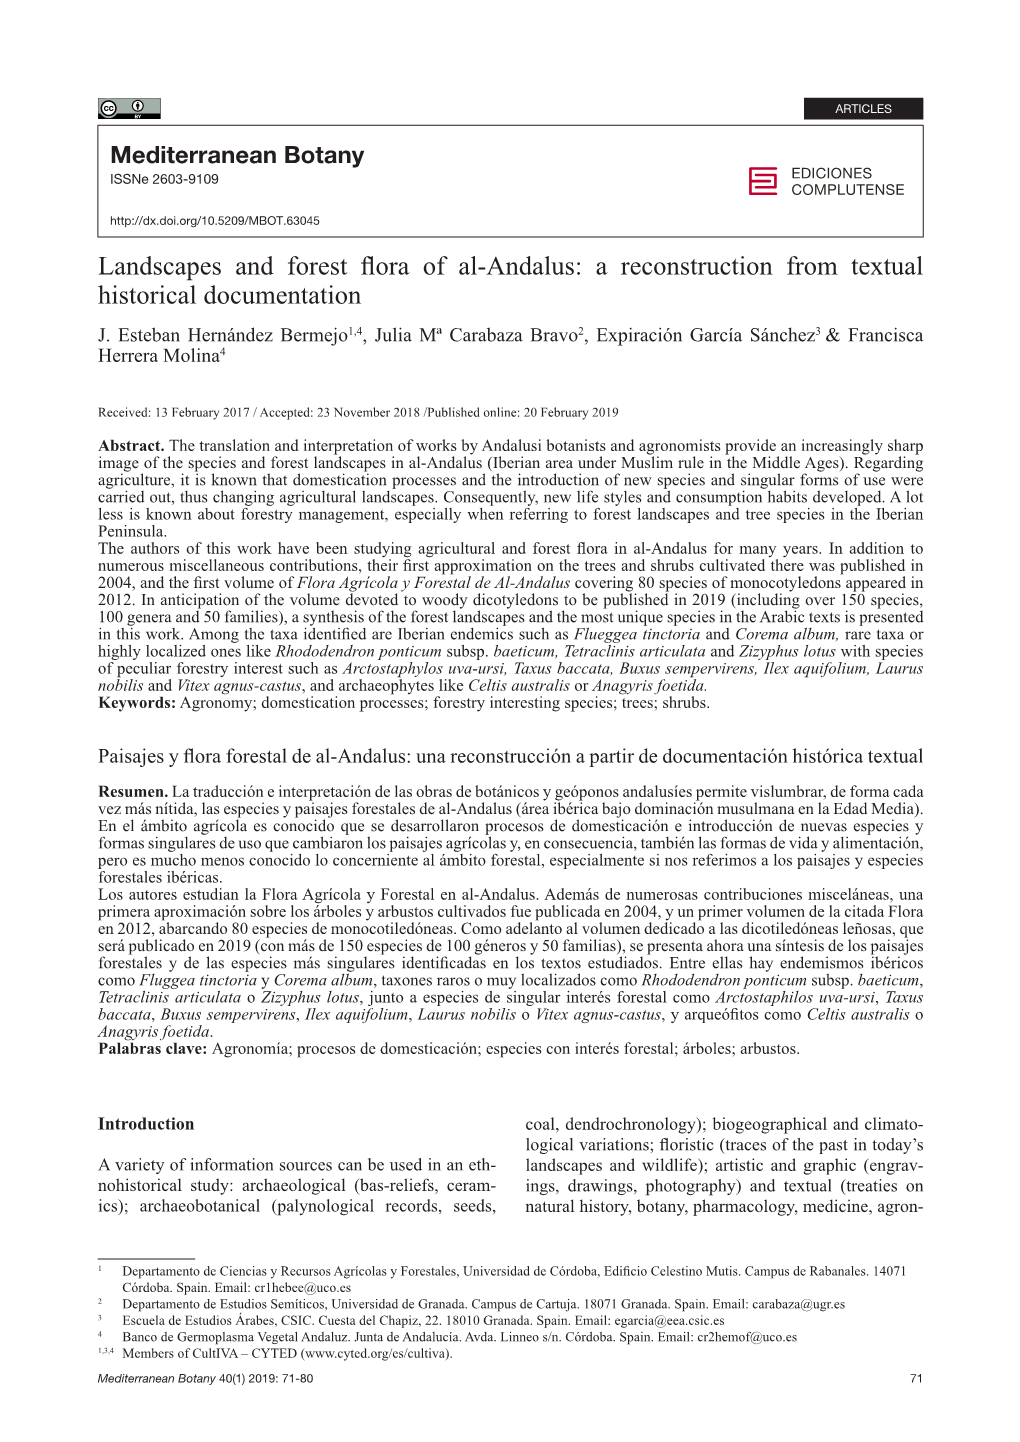 Landscapes and Forest Flora of Al-Andalus: a Reconstruction from Textual Historical Documentation J